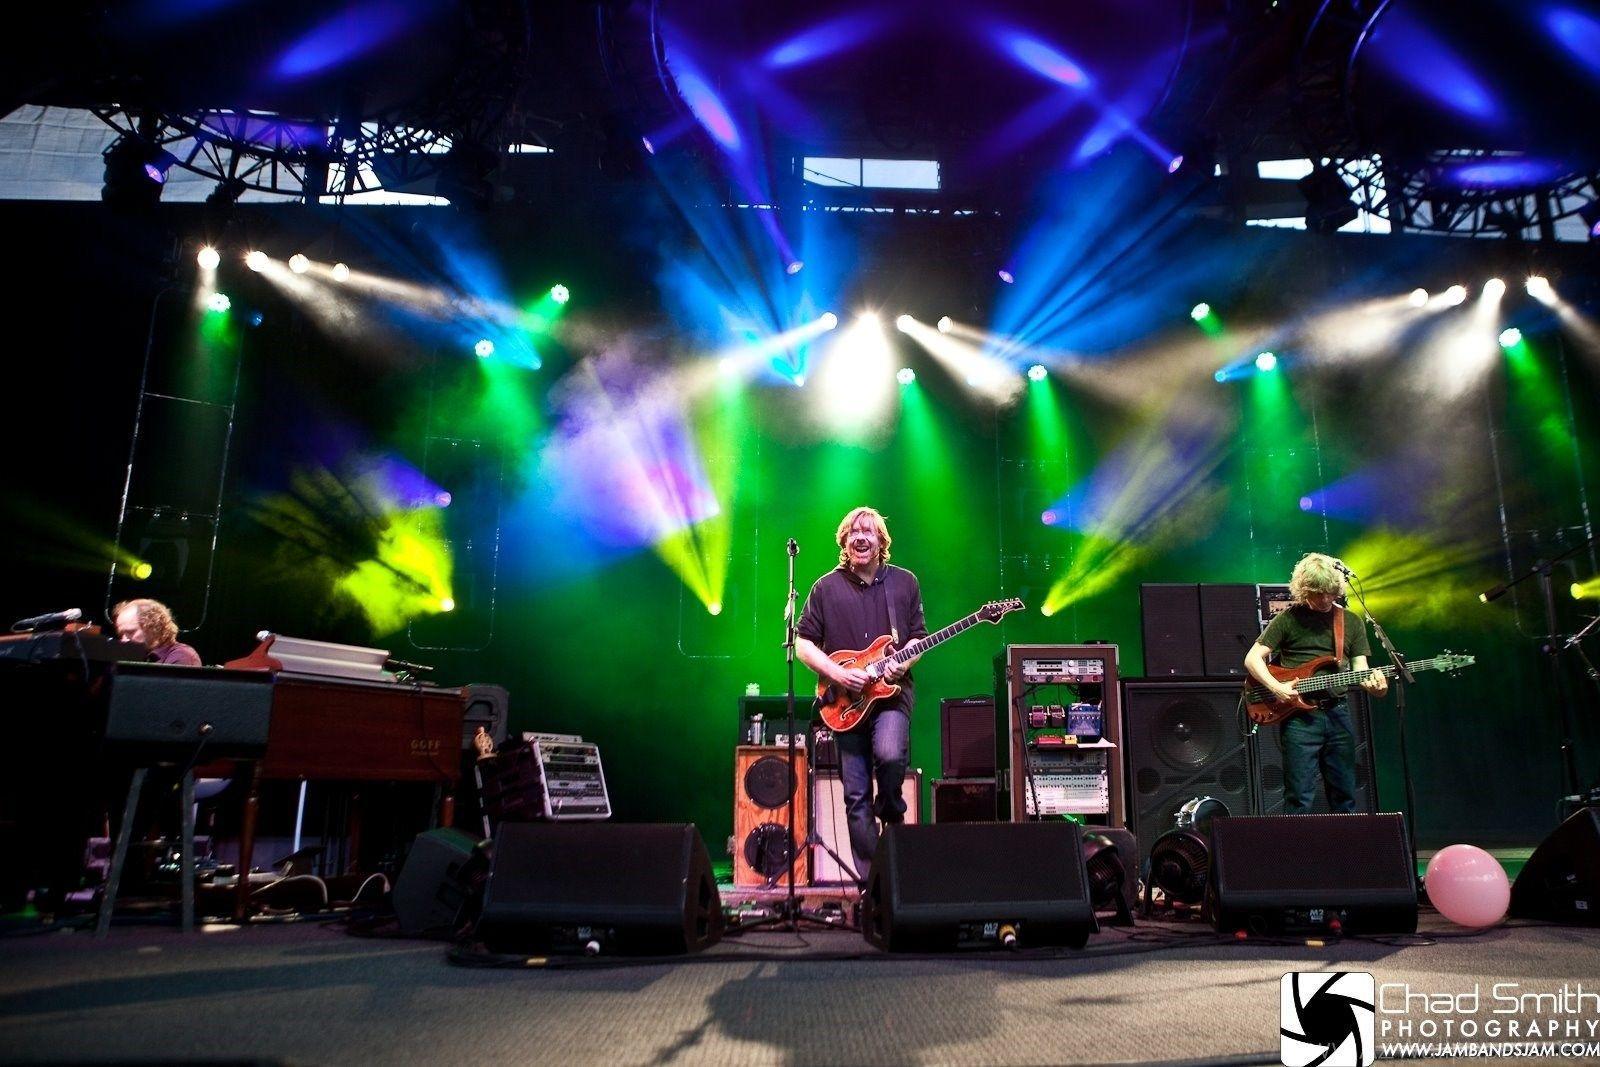 Download Phish Live Wallpaper Lightshow For Android, Phish Live